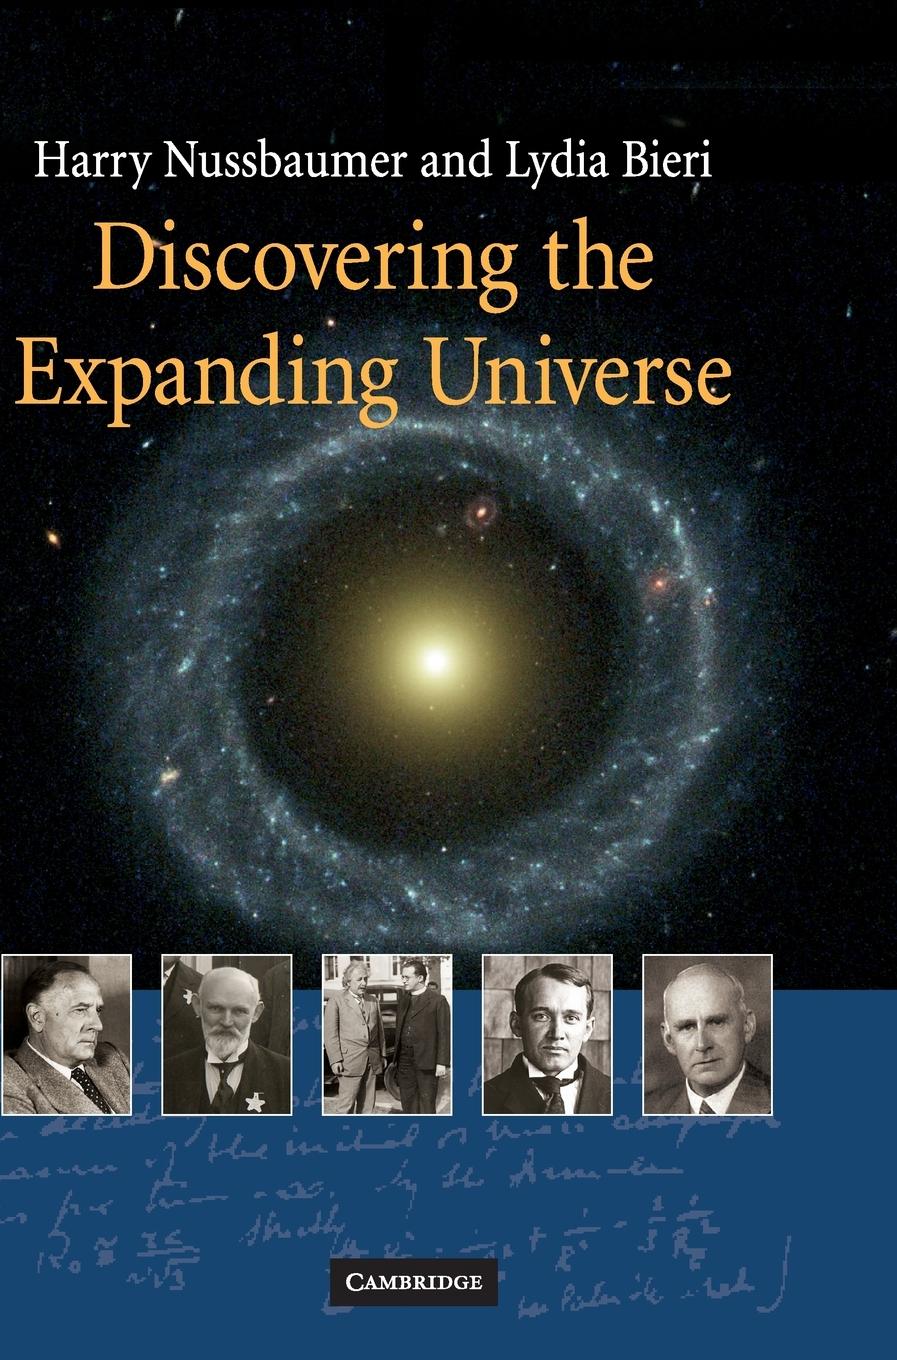 Discovering the Expanding Universe - Bieri, Lydia|Nussbaumer, Harry